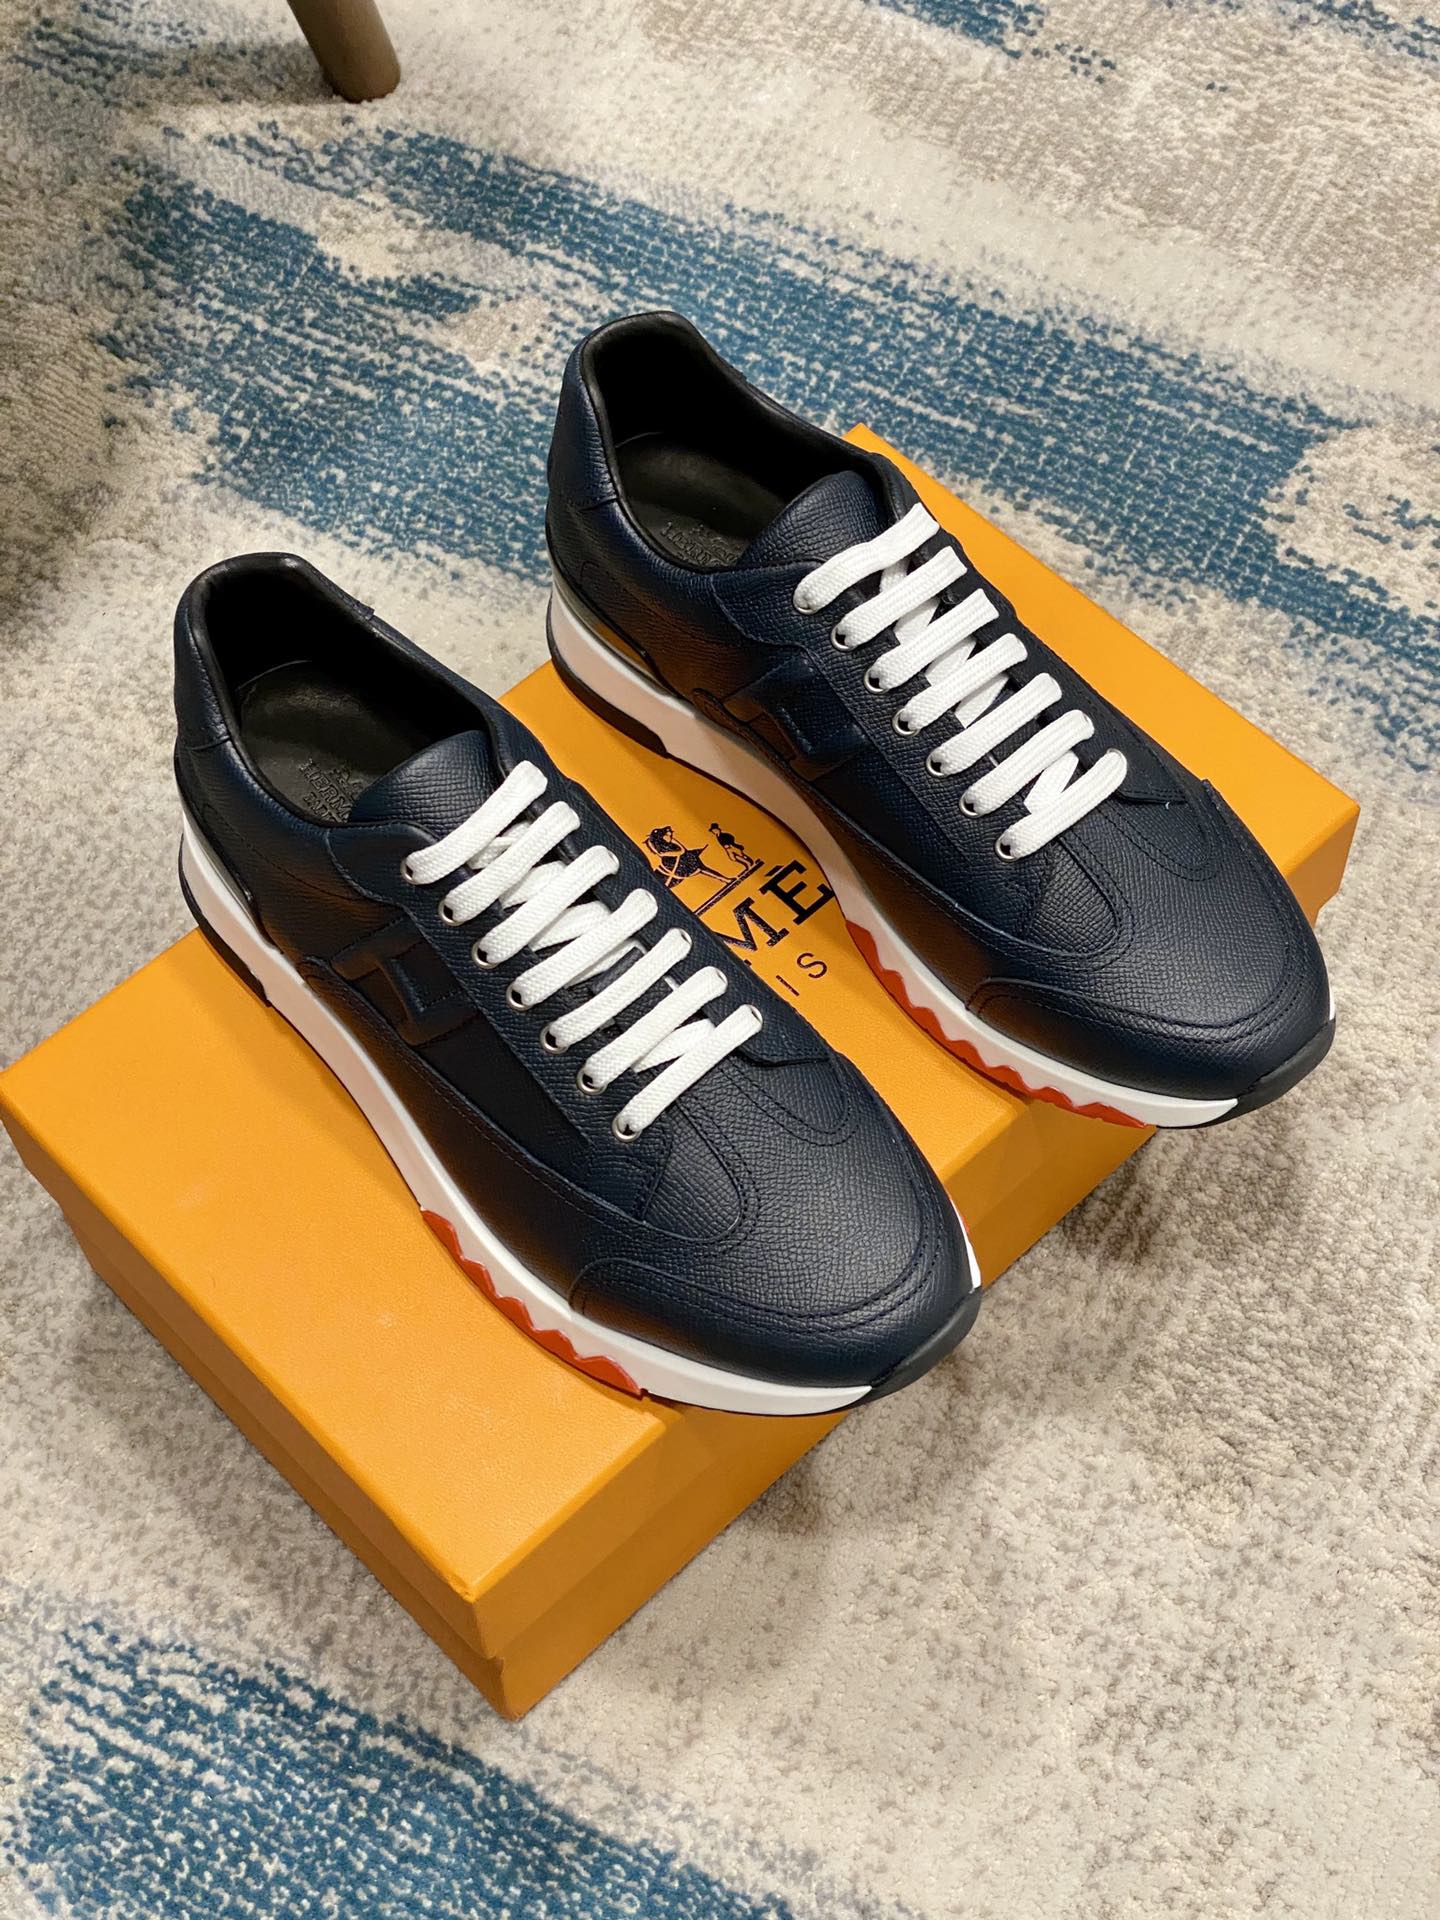 Hermes Shoes Sneakers Cowhide Fashion Casual